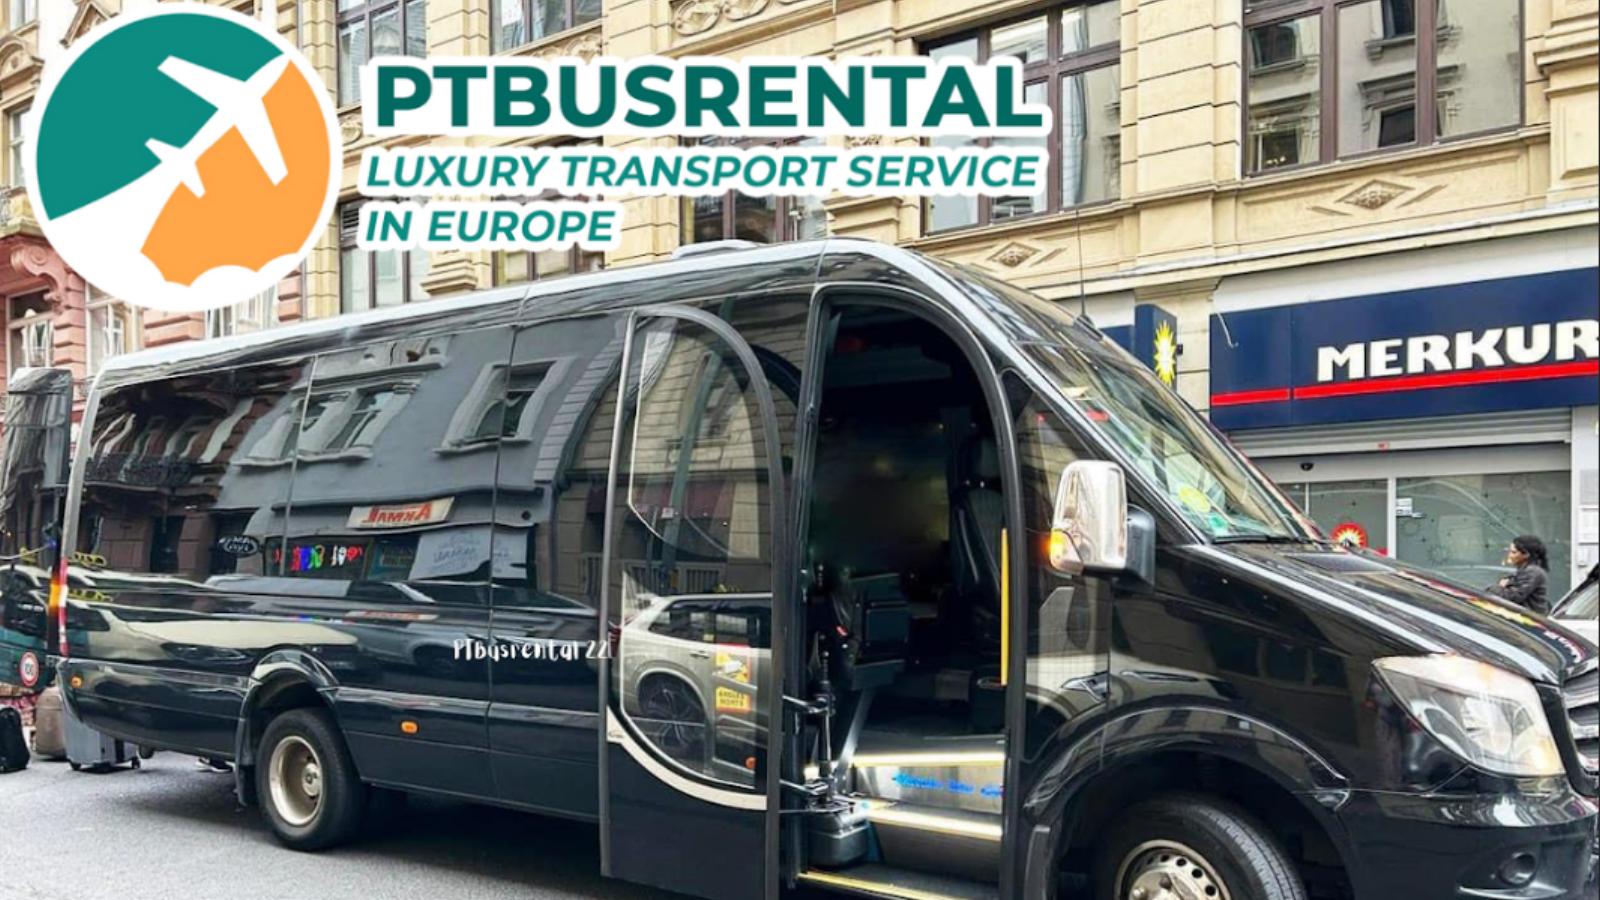 Join PTBusrental to do 10 best things to do in Norway on the rental bus in Norway